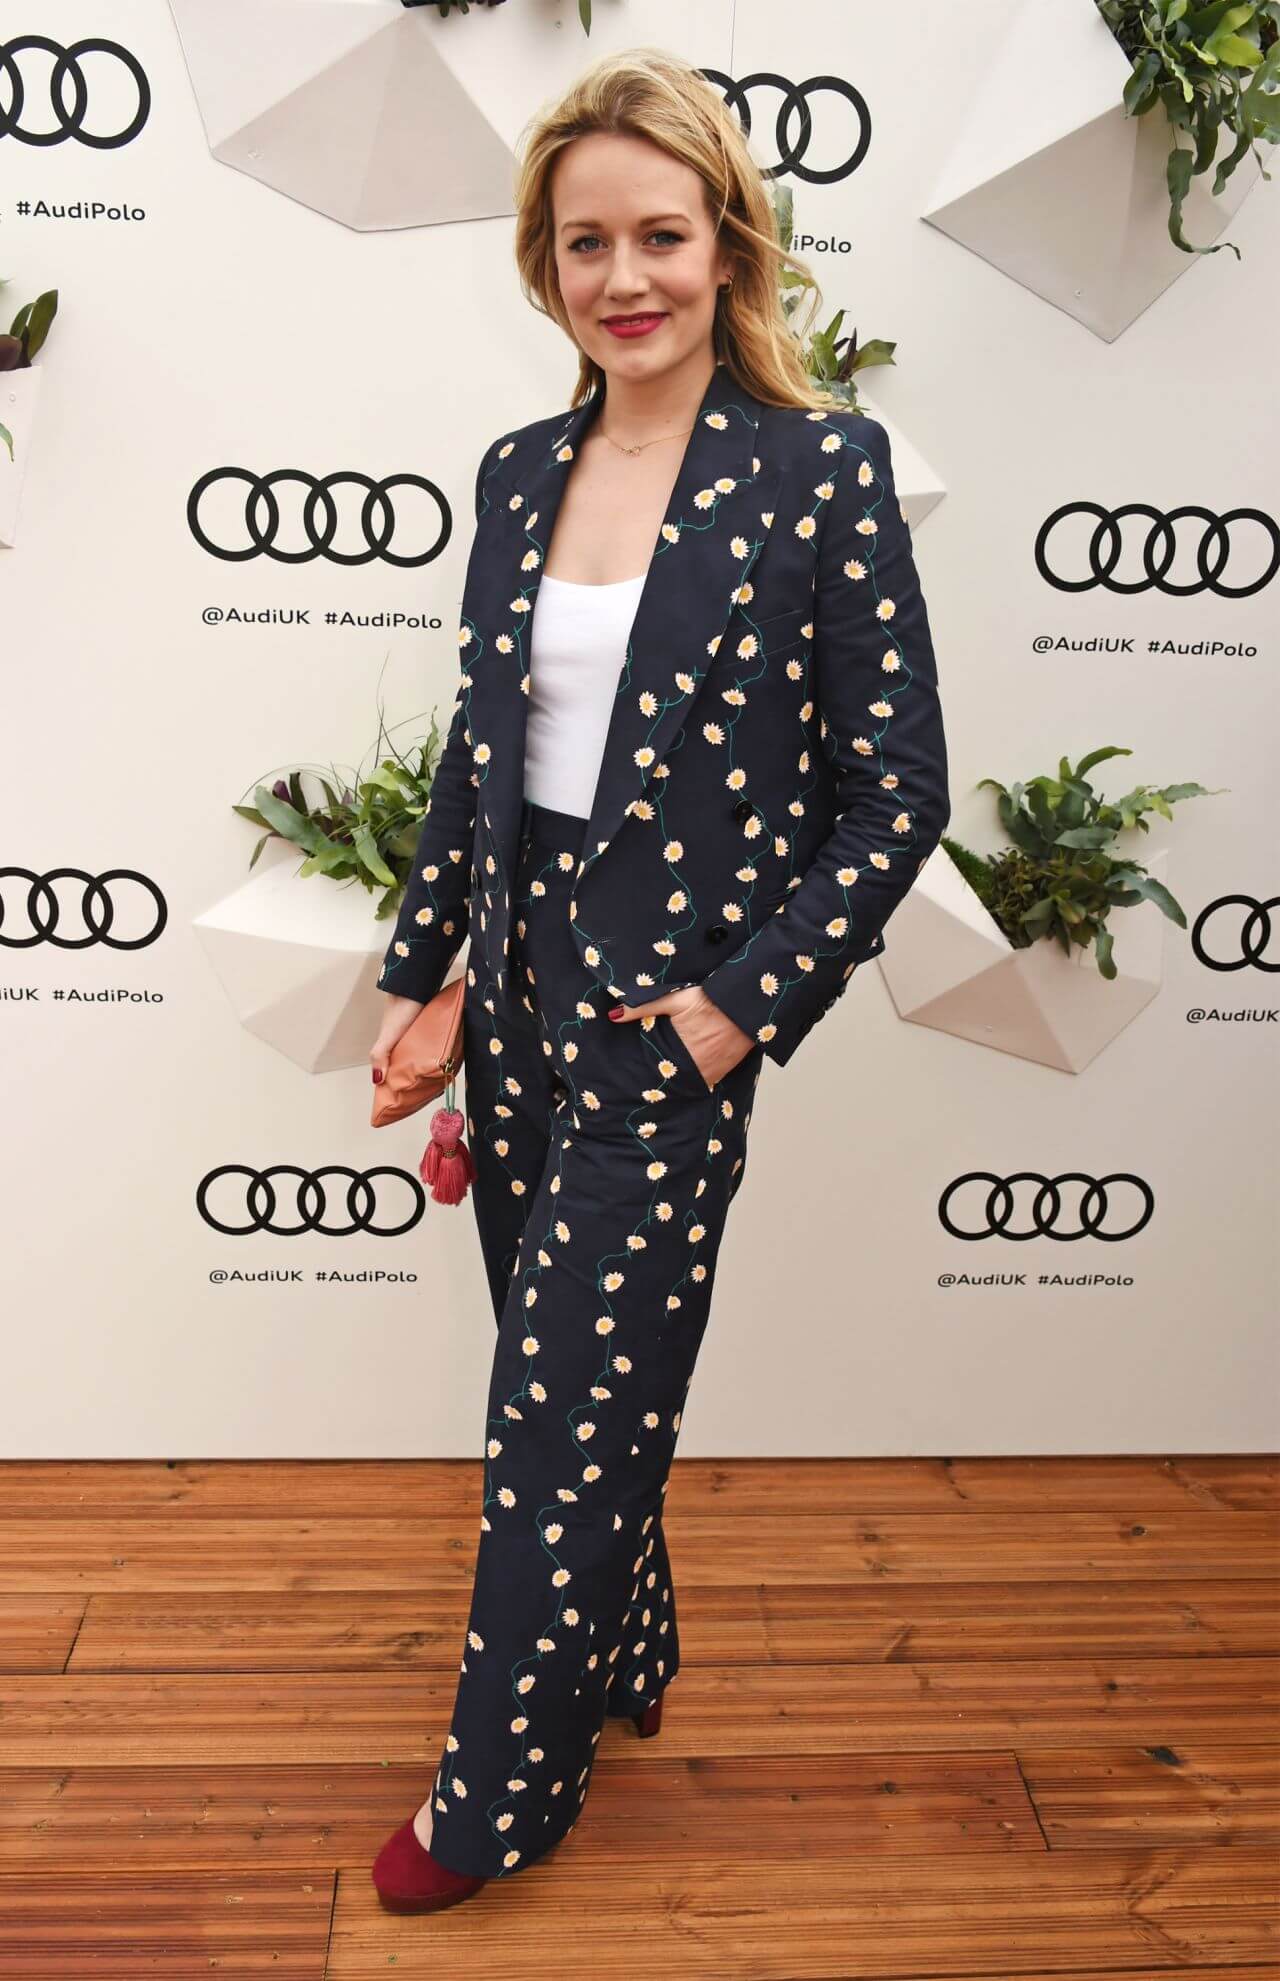 Cara Theobold  In Floral Design Blazer Under A White Top & Pants At Audi Polo Challenge Ascot, UK